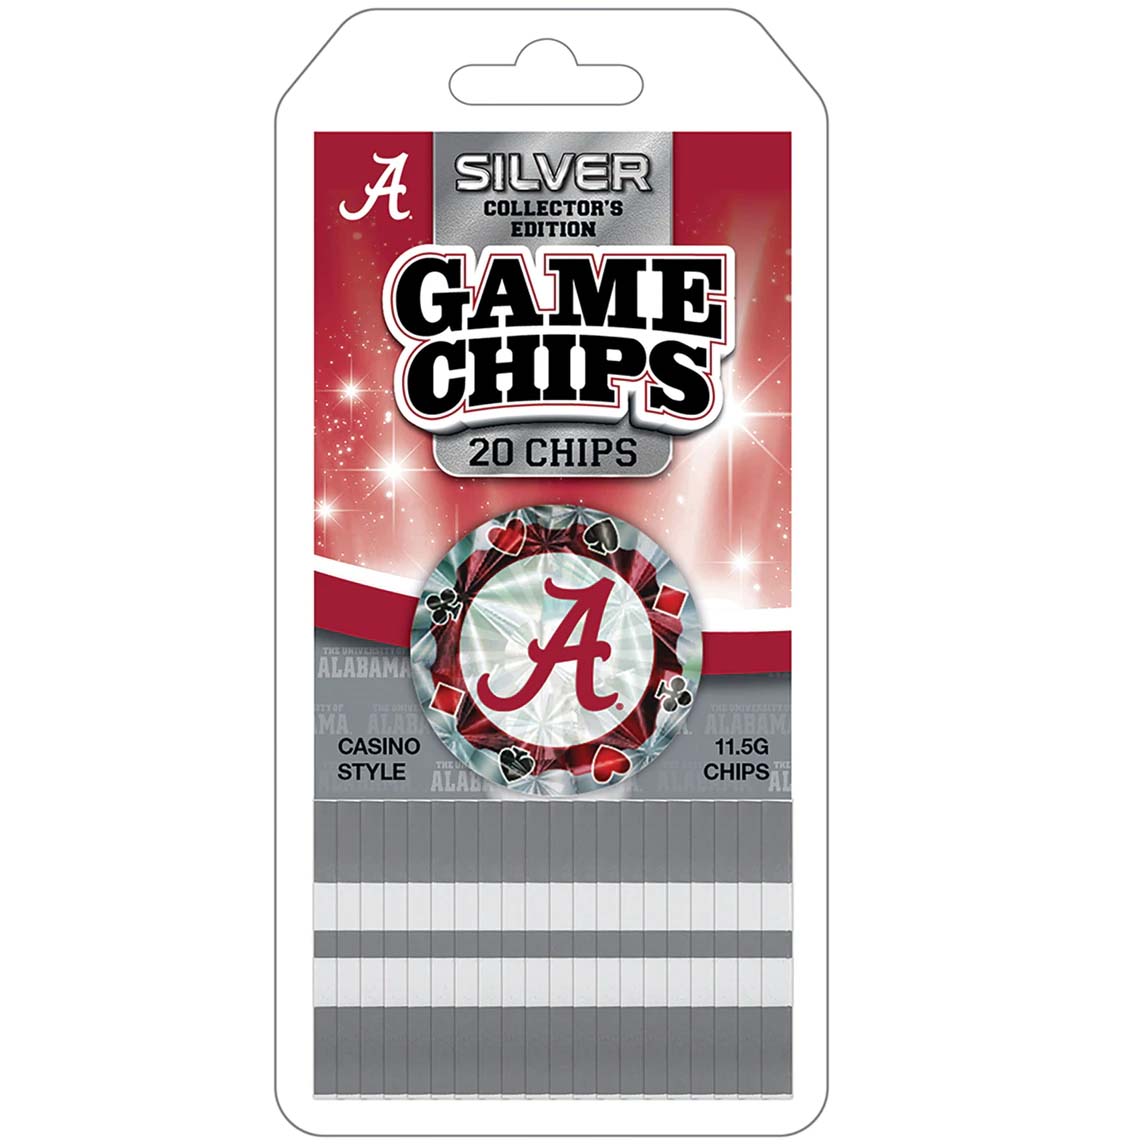 University of Alabama Special Edition Gold Poker Chips, 20 Chips